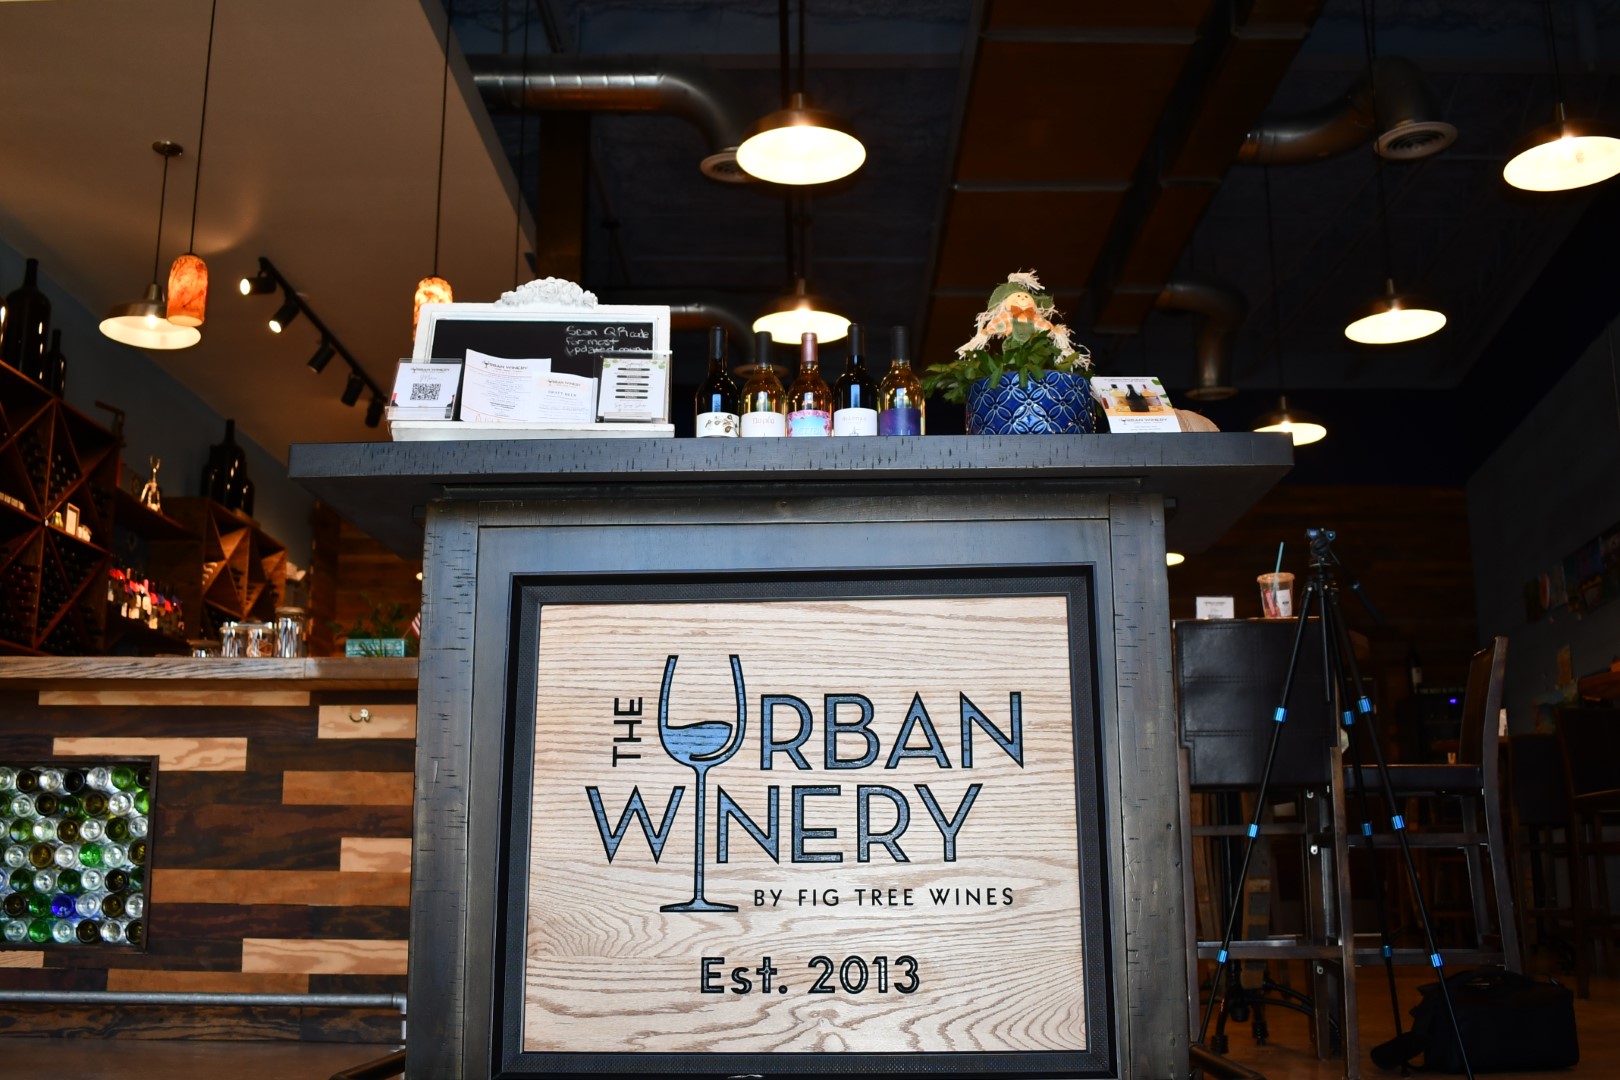  A podium with Urban Winery sign stands in front of the reception area.